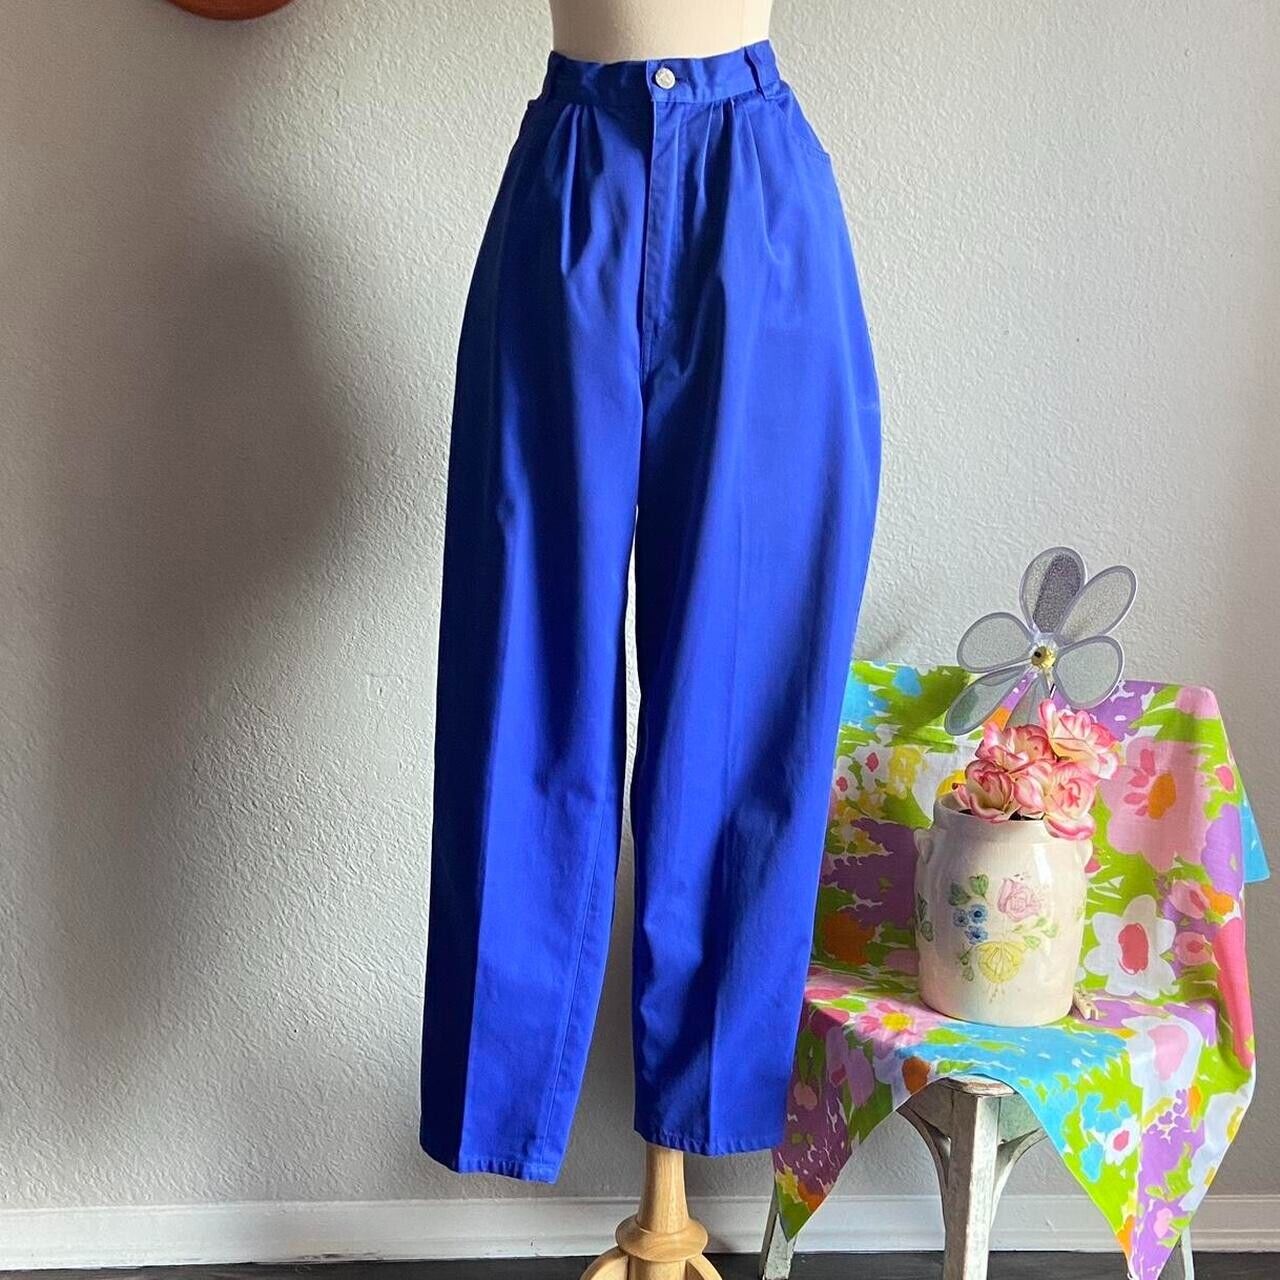 VINTAGE 1980S 1990S HIGH WAIST BLUE PLEATED TAPERED LEG PANTS size 16